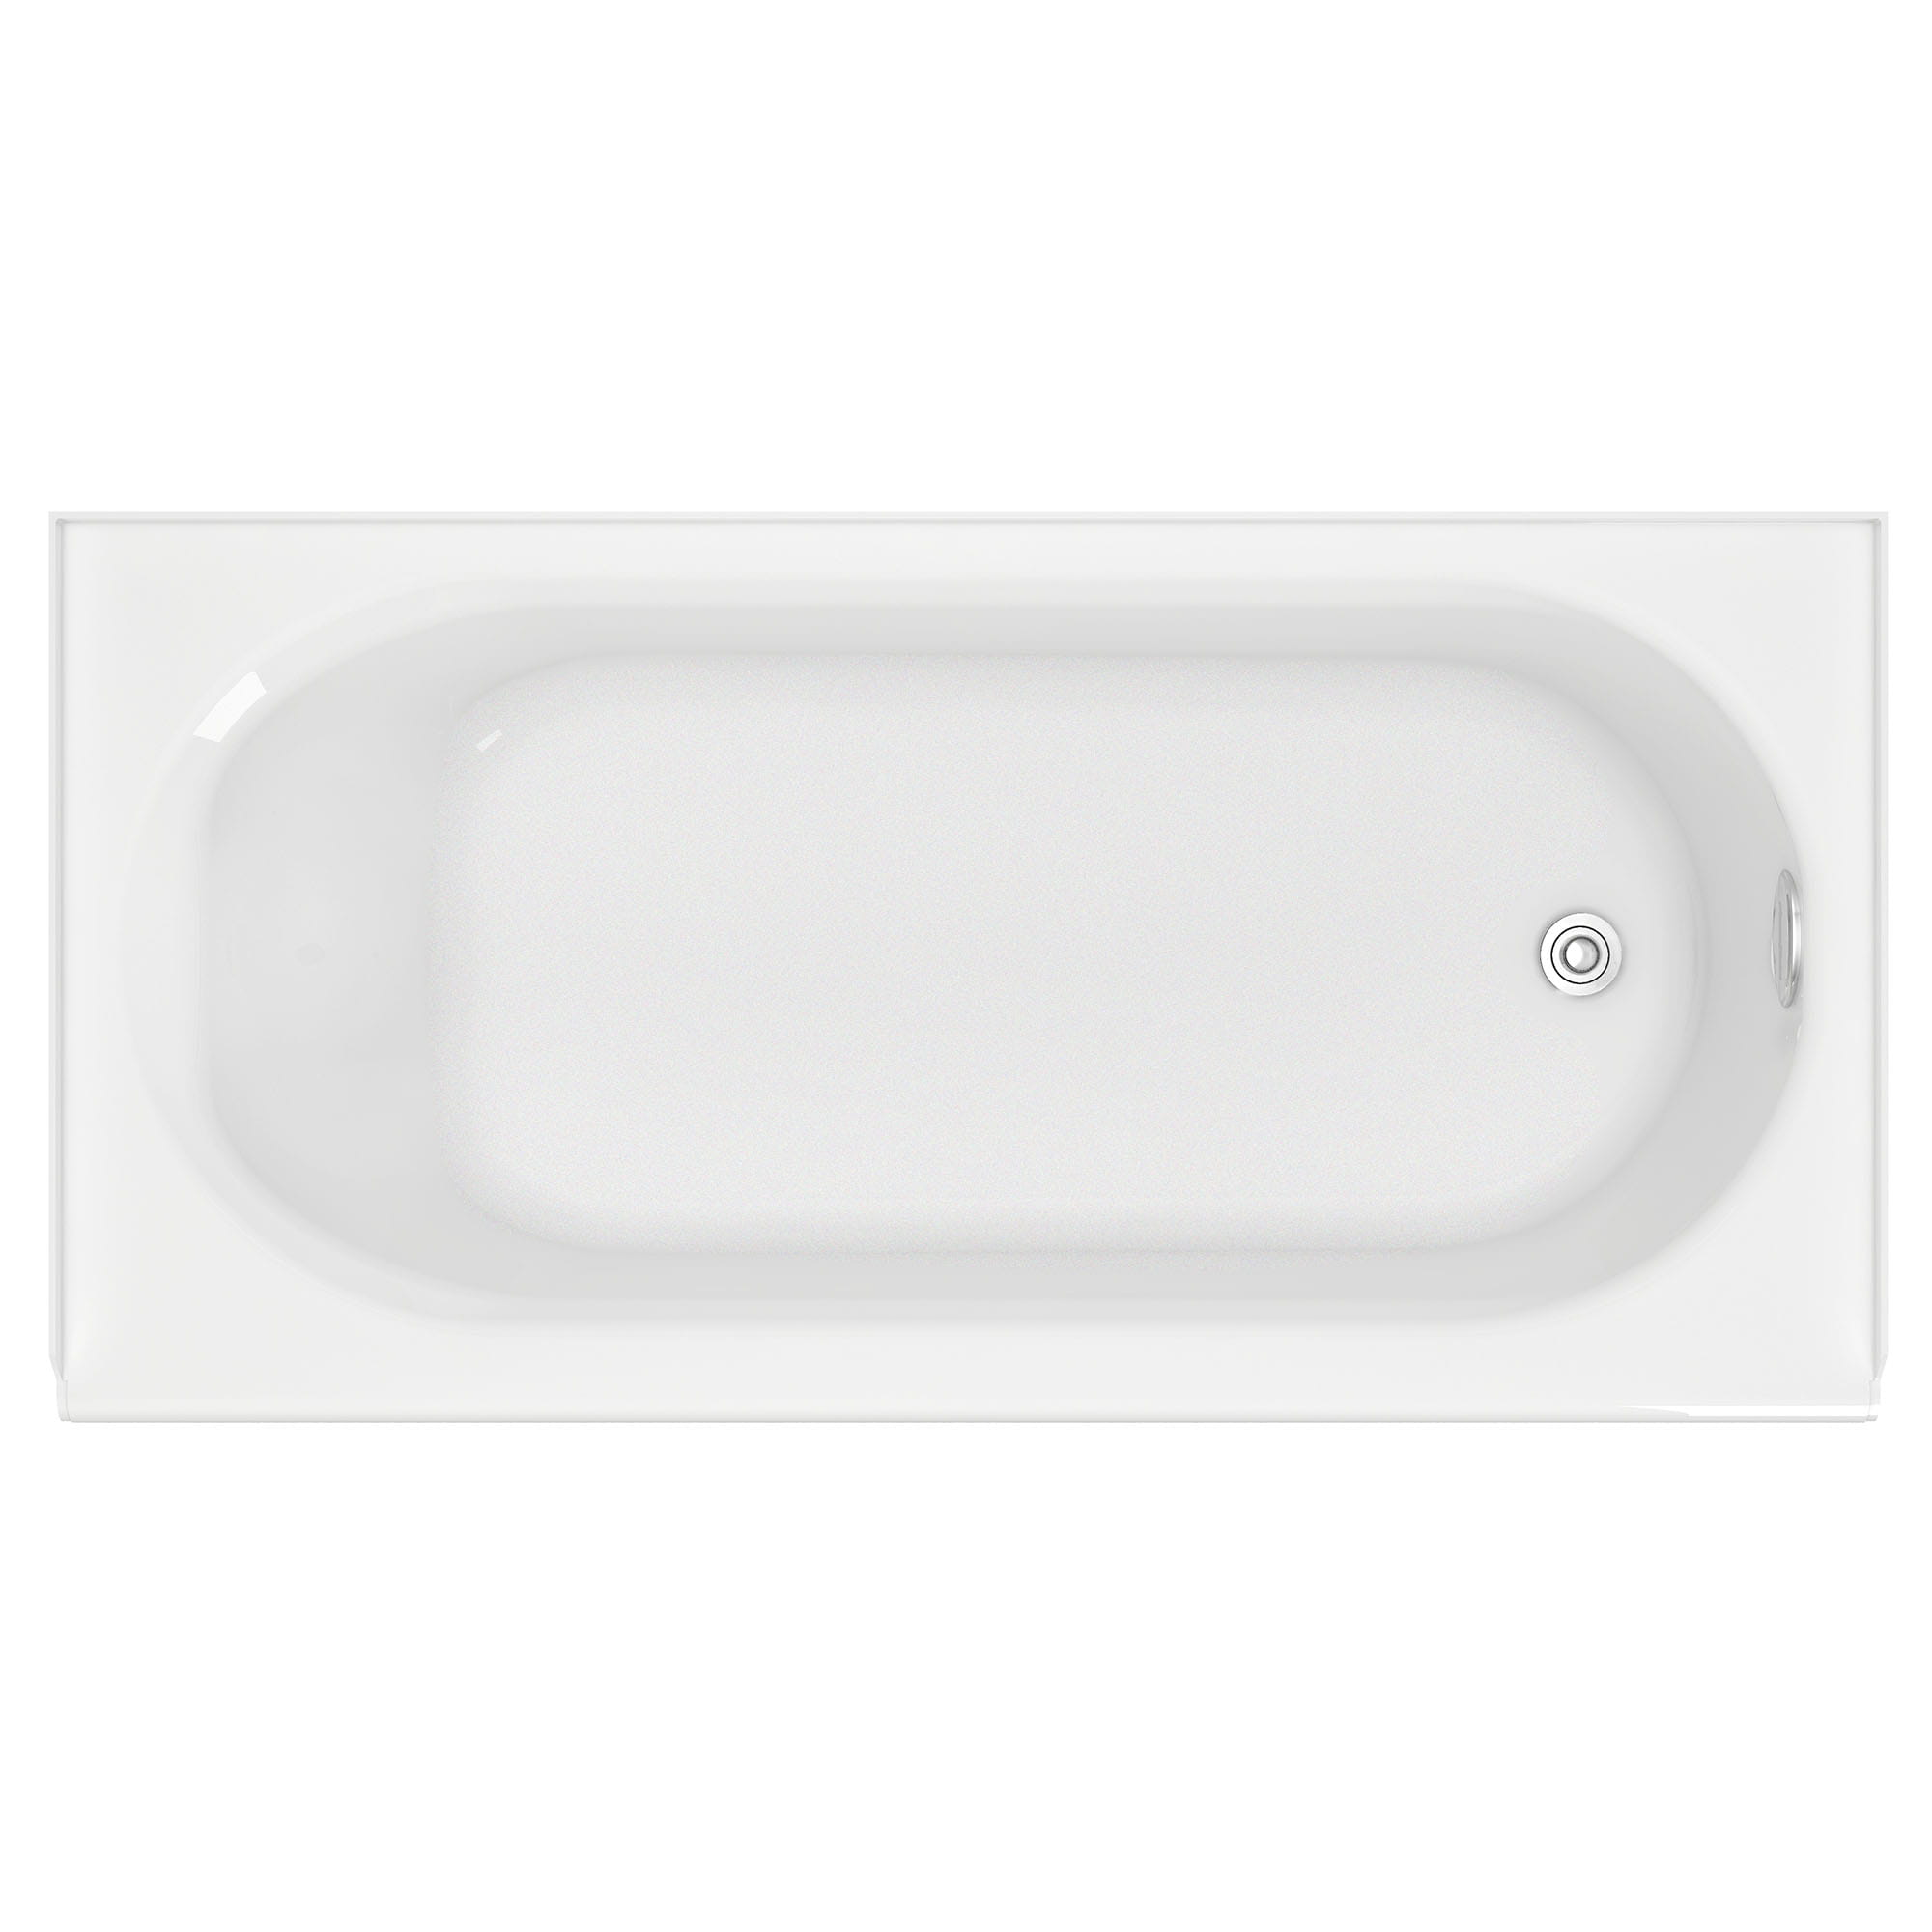 Princeton® Americast® 60 x 30-Inch Integral Apron Bathtub Right-Hand Outlet With Integral Drain